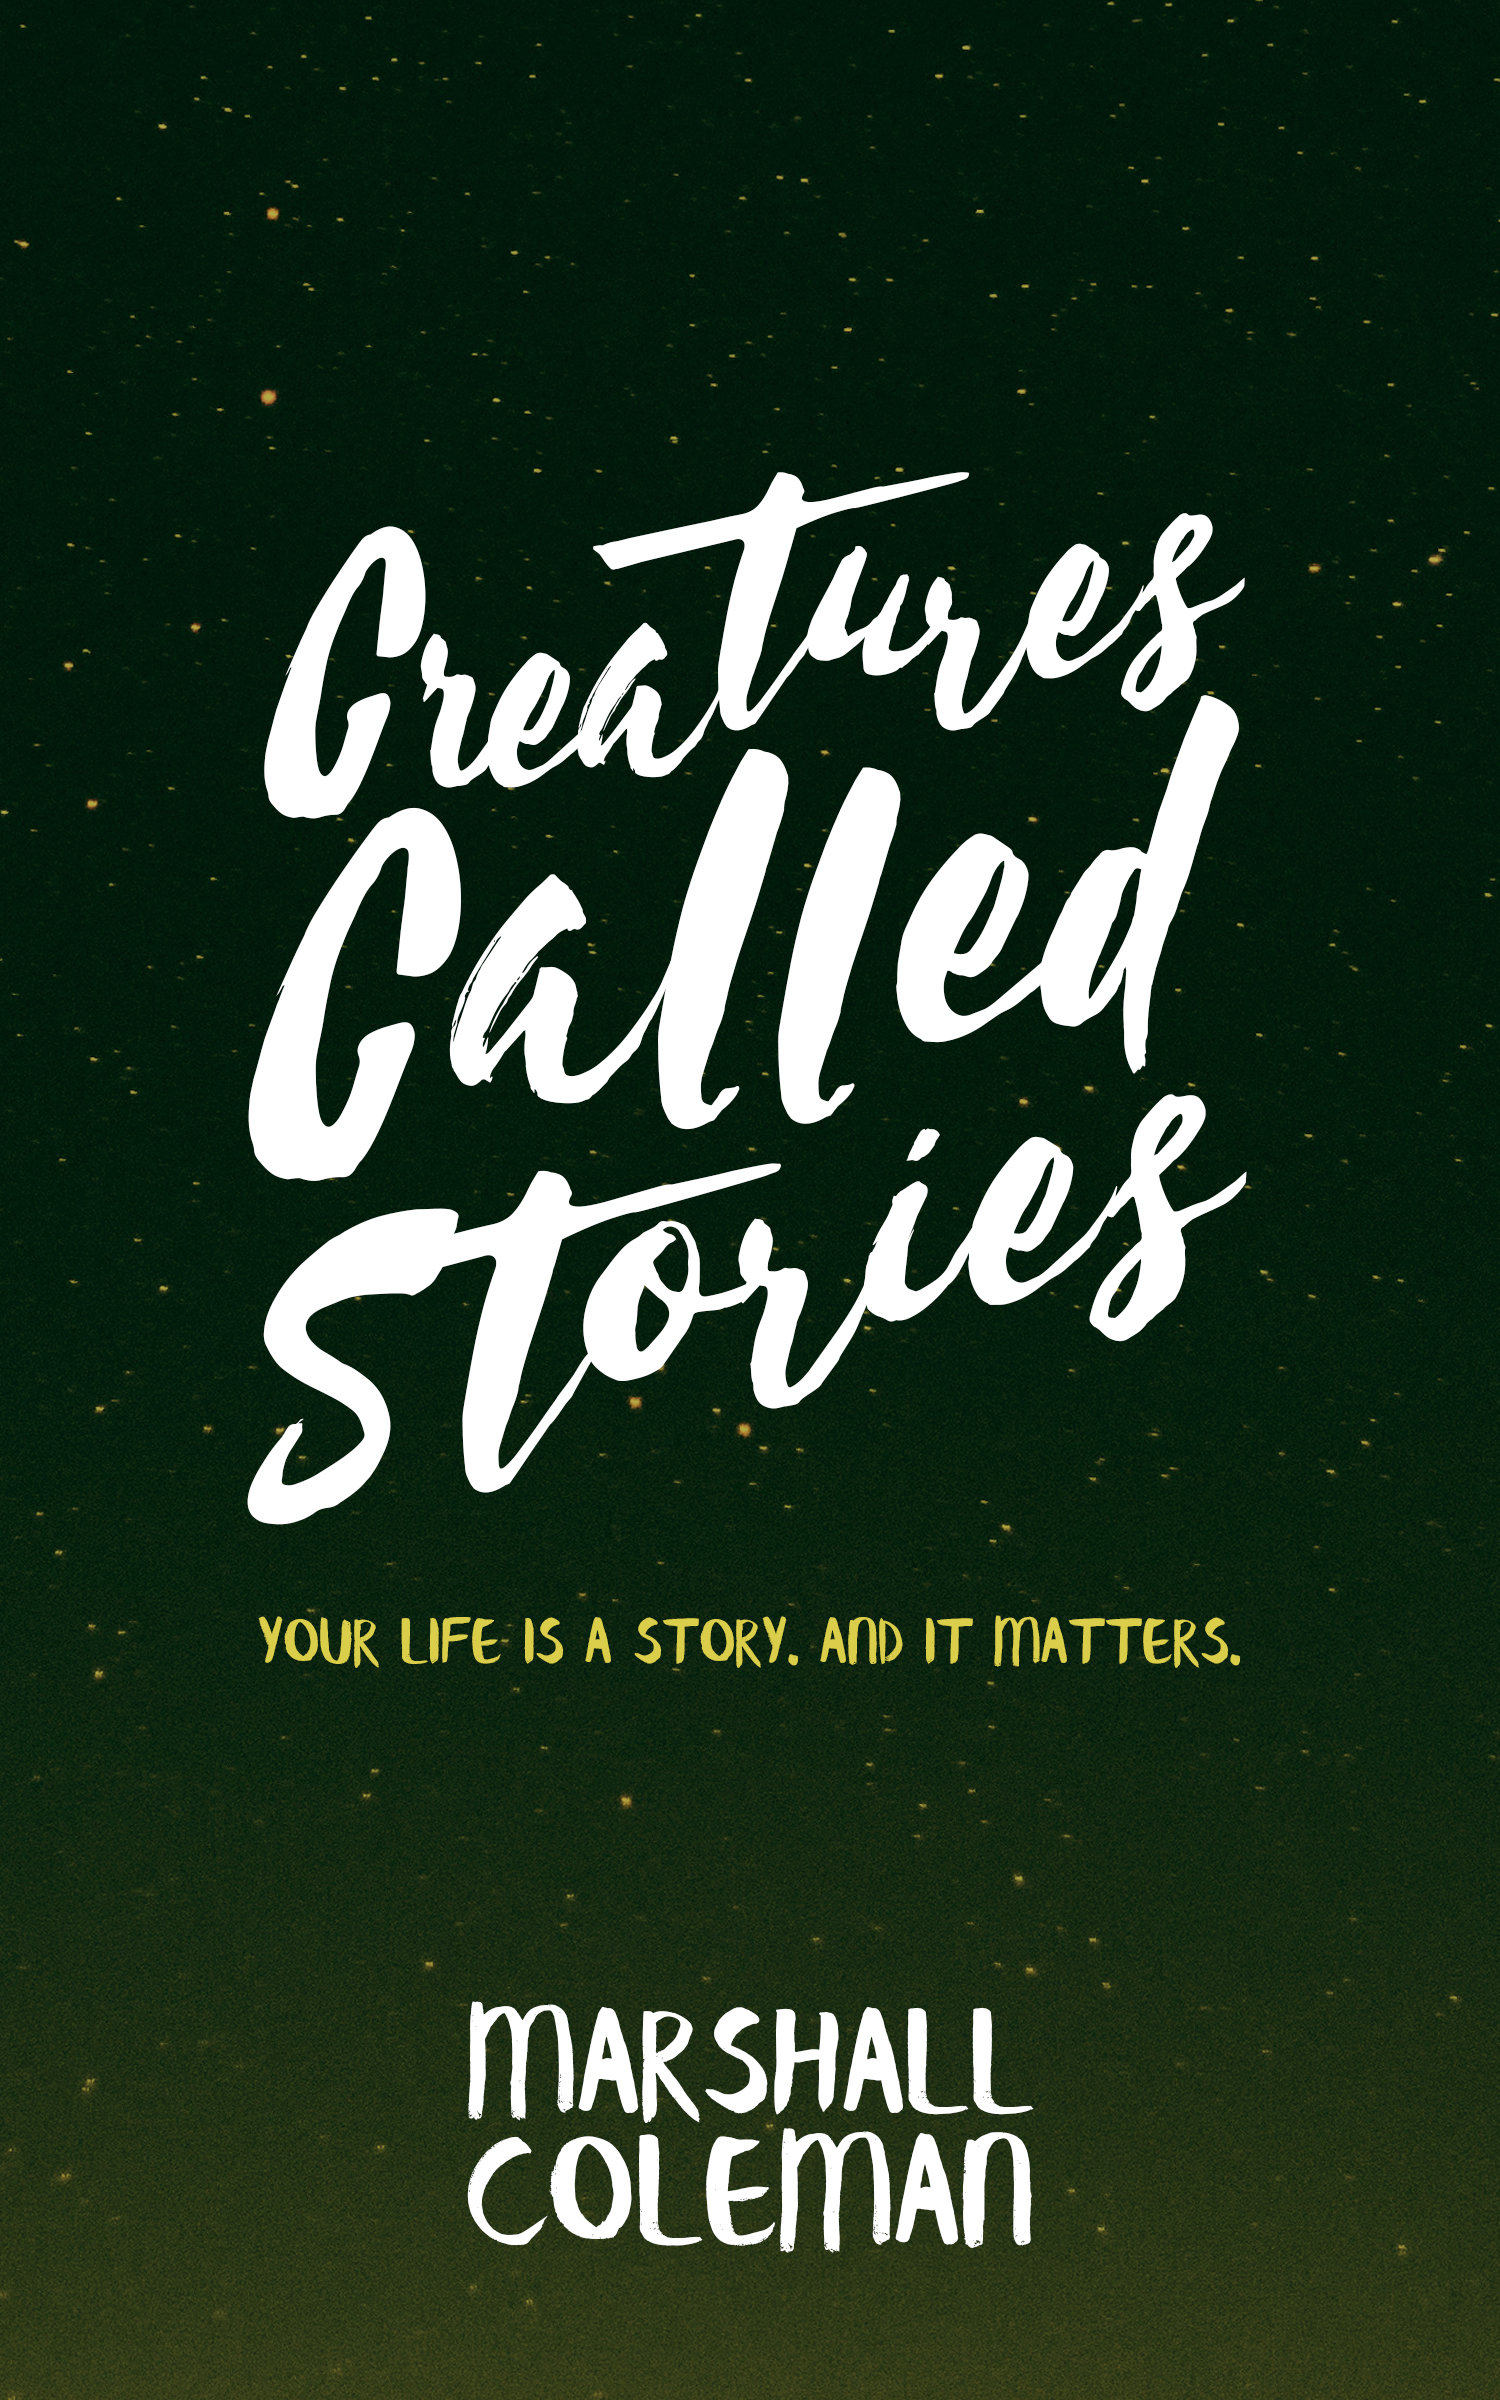 FREE: Creatures Called Stories: Your Life is a Story. And It Matters. by Marshall Coleman